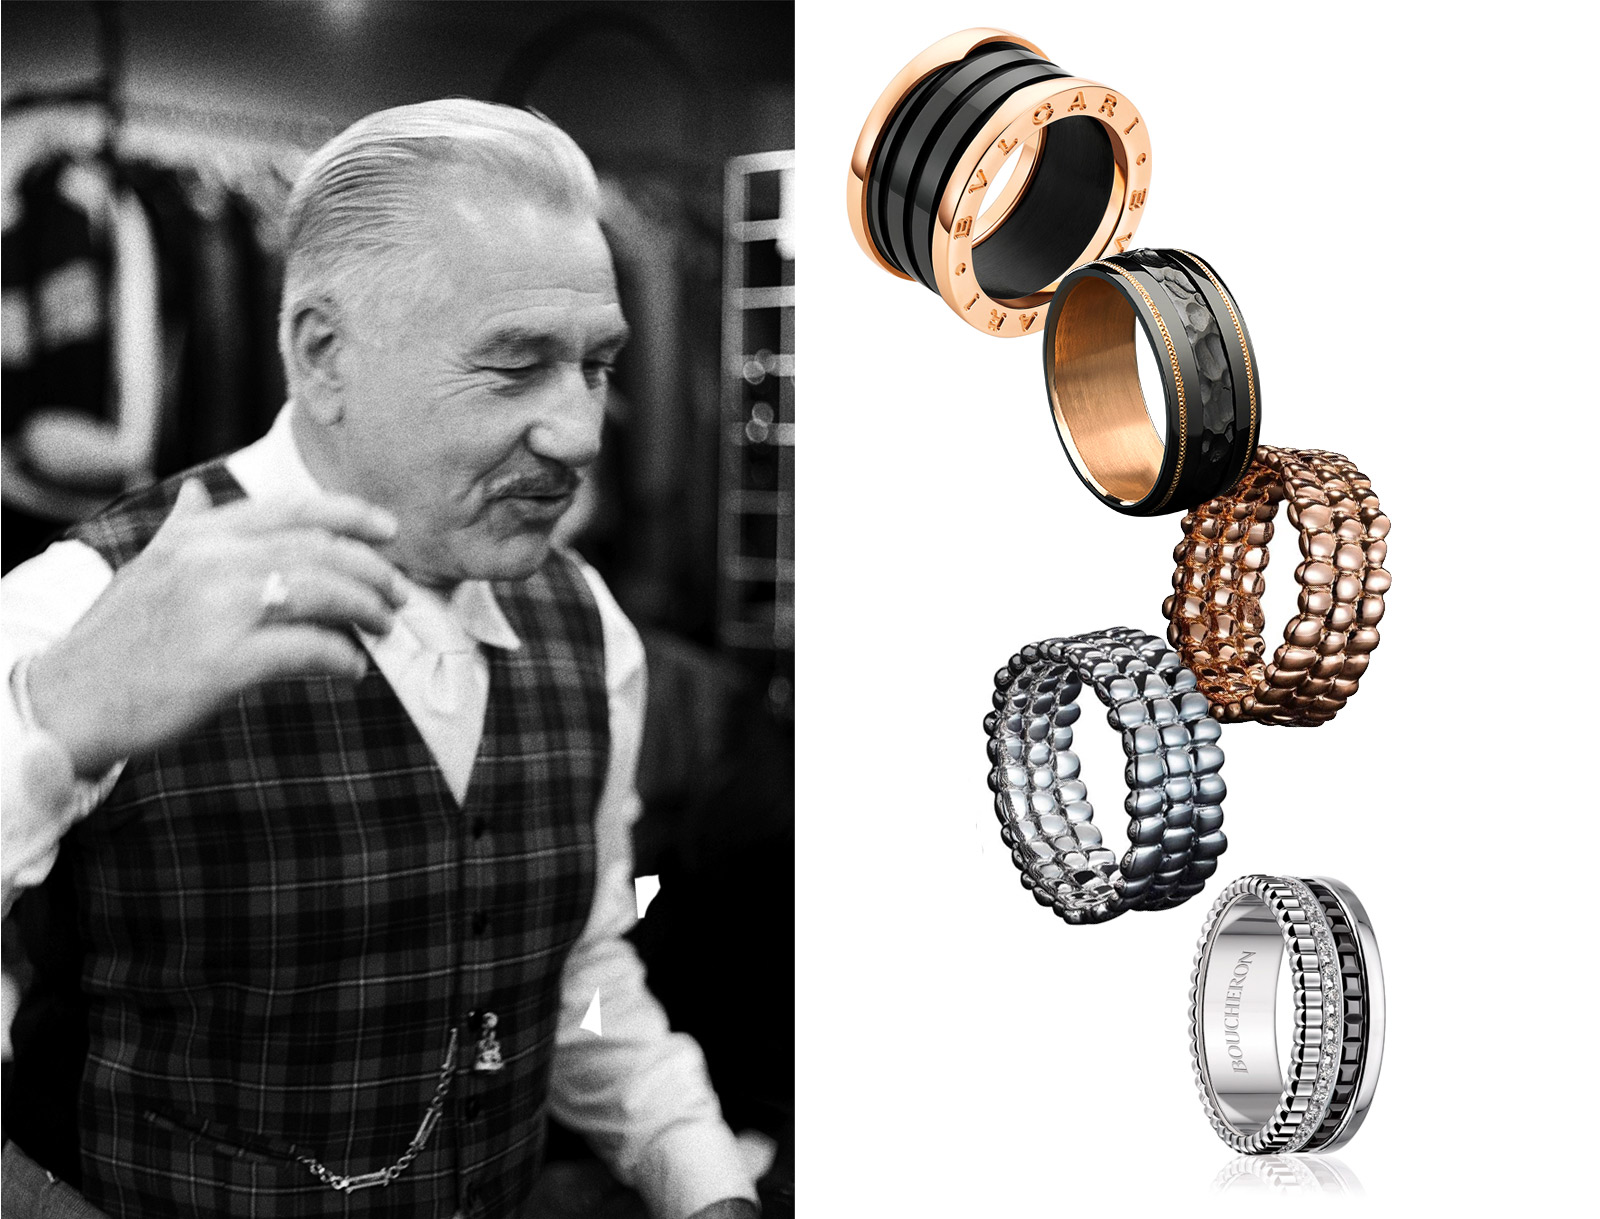 From top to bottom: Bulgari B. Zero men's ring, Zoltan David knightsteel ring, Julien Riad Sahyoun rings in rose gold and white gold, and Boucheron Quatre stack ring with diamonds. Photo on the left by Ross Trevail from the Tomfoolery series